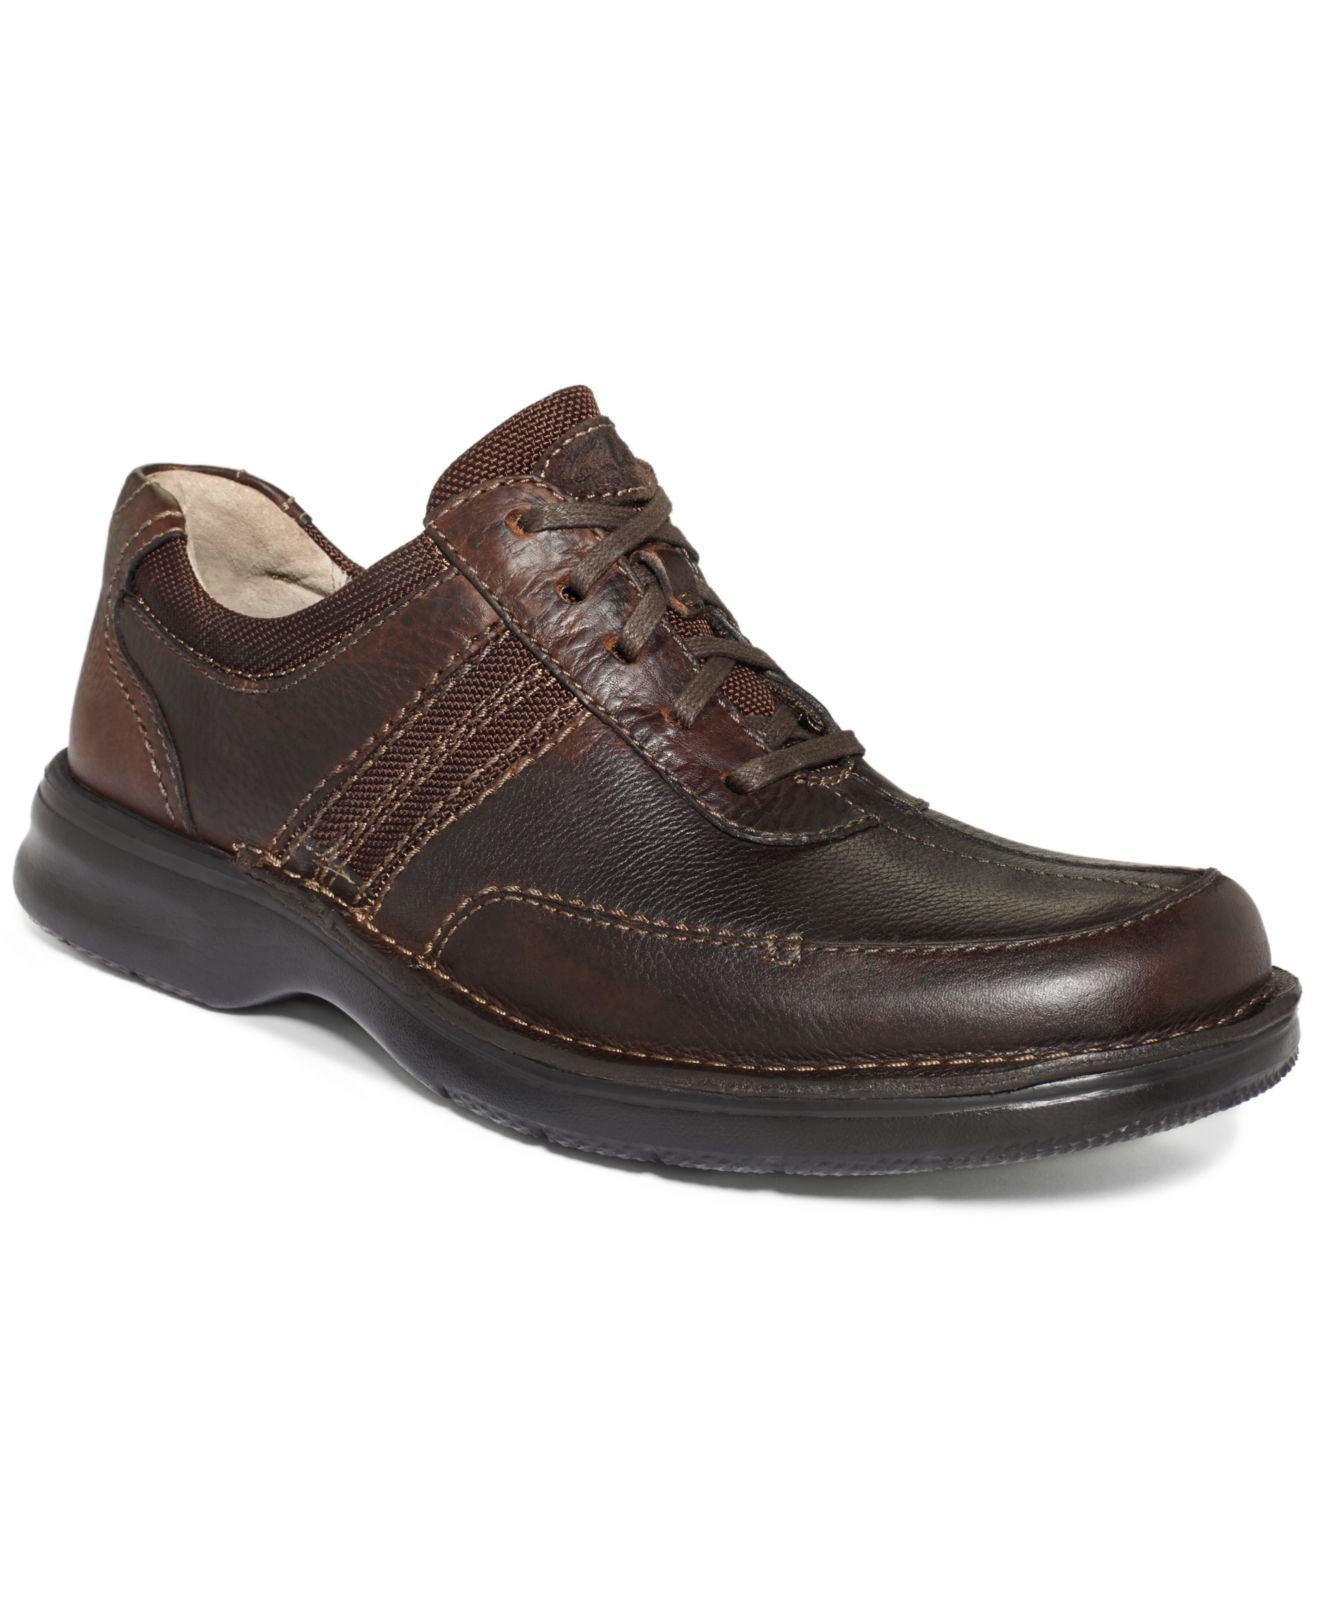 clarks slone lace up shoes